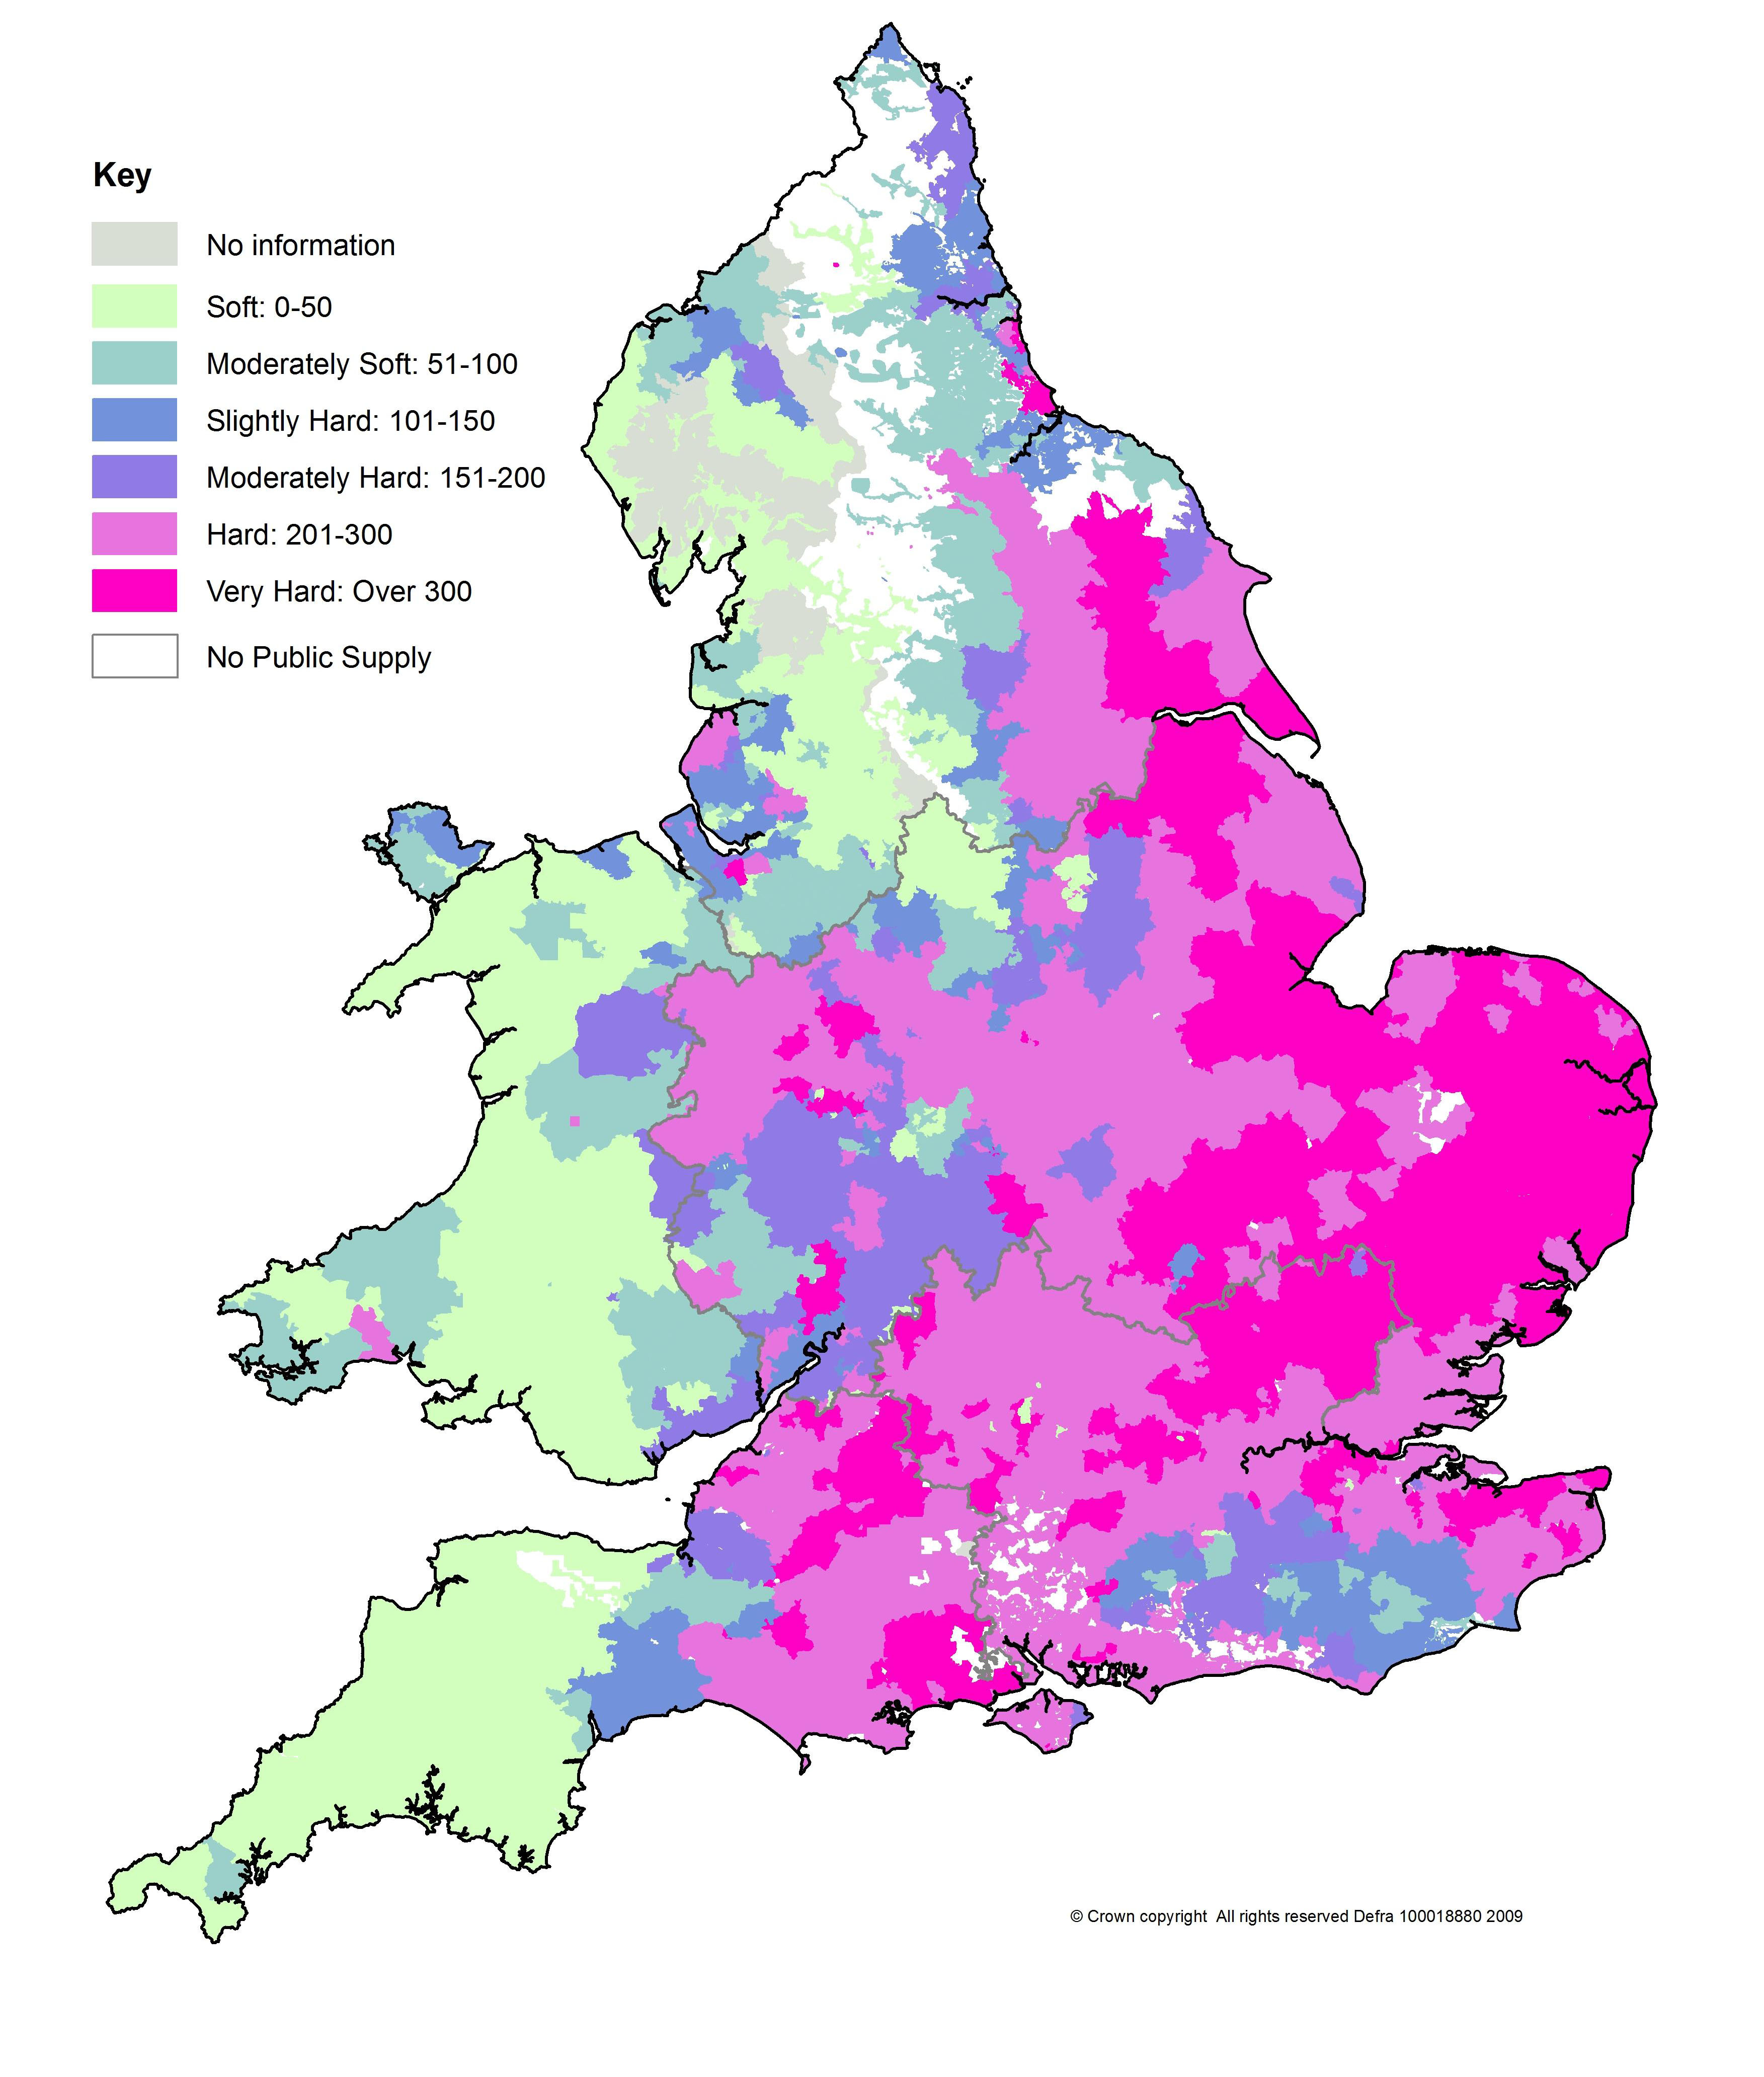 Hard Water Areas In The Uk 40